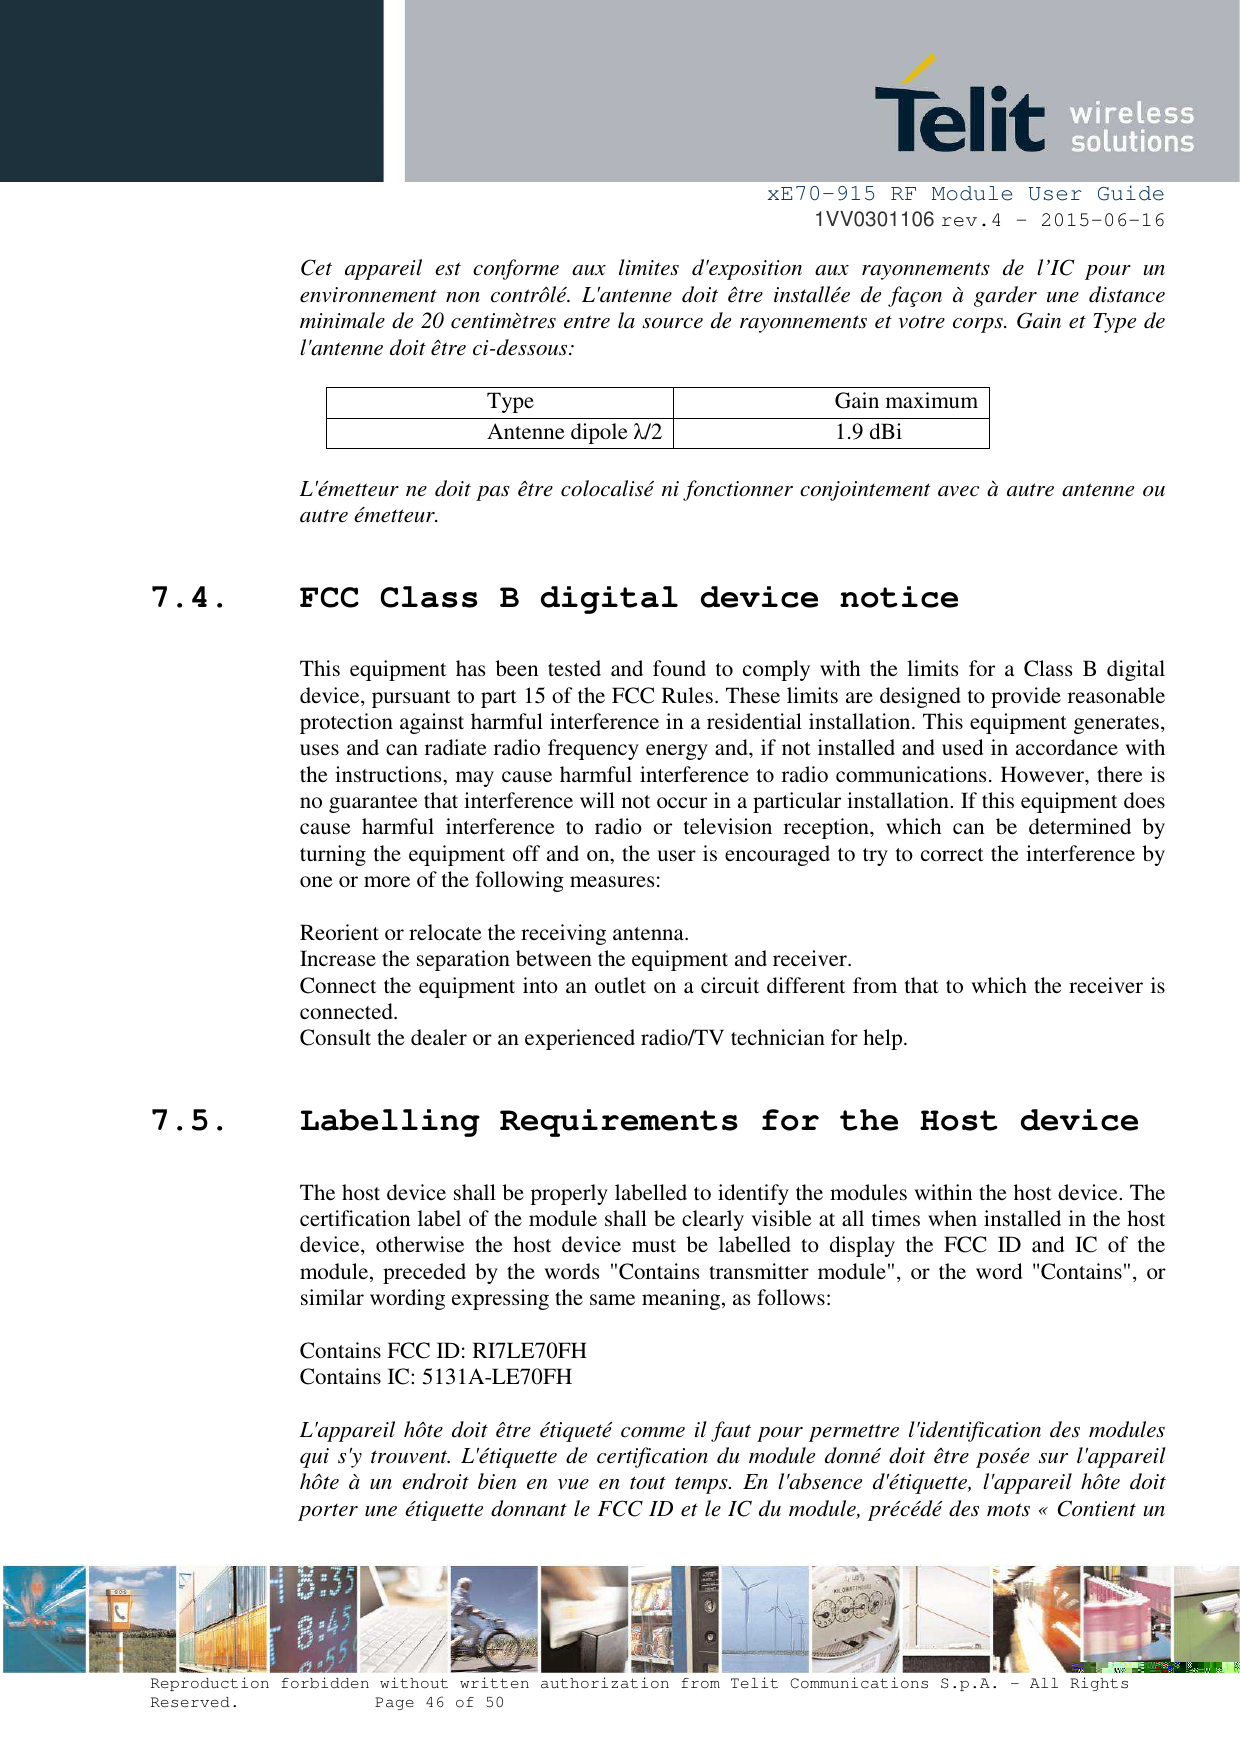 xE70-915 RF Module User Guide 1VV0301106 rev.4 – 2015-06-16 Reproduction forbidden without written authorization from Telit Communications S.p.A. - All Rights Reserved.    Page 46 of 50 Cet  appareil  est  conforme  aux  limites  d&apos;exposition  aux  rayonnements  de  l’IC  pour  un environnement  non  contrôlé.  L&apos;antenne  doit  être  installée  de  façon  à  garder  une  distance minimale de 20 centimètres entre la source de rayonnements et votre corps. Gain et Type de l&apos;antenne doit être ci-dessous: Type  Gain maximum Antenne dipole λ/2 1.9 dBi L&apos;émetteur ne doit pas être colocalisé ni fonctionner conjointement avec à autre antenne ou autre émetteur. 7.4. FCC Class B digital device notice This equipment has been tested and found to  comply with the  limits for a Class B digital device, pursuant to part 15 of the FCC Rules. These limits are designed to provide reasonable protection against harmful interference in a residential installation. This equipment generates, uses and can radiate radio frequency energy and, if not installed and used in accordance with the instructions, may cause harmful interference to radio communications. However, there is no guarantee that interference will not occur in a particular installation. If this equipment does cause  harmful  interference  to  radio  or  television  reception,  which  can  be  determined  by turning the equipment off and on, the user is encouraged to try to correct the interference by one or more of the following measures: Reorient or relocate the receiving antenna. Increase the separation between the equipment and receiver.  Connect the equipment into an outlet on a circuit different from that to which the receiver is connected.  Consult the dealer or an experienced radio/TV technician for help. 7.5. Labelling Requirements for the Host device The host device shall be properly labelled to identify the modules within the host device. The certification label of the module shall be clearly visible at all times when installed in the host device,  otherwise  the  host  device  must  be  labelled  to  display  the  FCC  ID  and  IC  of  the module, preceded  by the words &quot;Contains transmitter module&quot;, or the word &quot;Contains&quot;, or similar wording expressing the same meaning, as follows: Contains FCC ID: RI7LE70FH Contains IC: 5131A-LE70FH L&apos;appareil hôte doit être étiqueté comme il faut pour permettre l&apos;identification des modules qui s&apos;y trouvent. L&apos;étiquette de certification du module donné doit être posée sur l&apos;appareil hôte  à  un  endroit  bien en vue  en  tout temps.  En l&apos;absence  d&apos;étiquette,  l&apos;appareil hôte  doit porter une étiquette donnant le FCC ID et le IC du module, précédé des mots « Contient un 